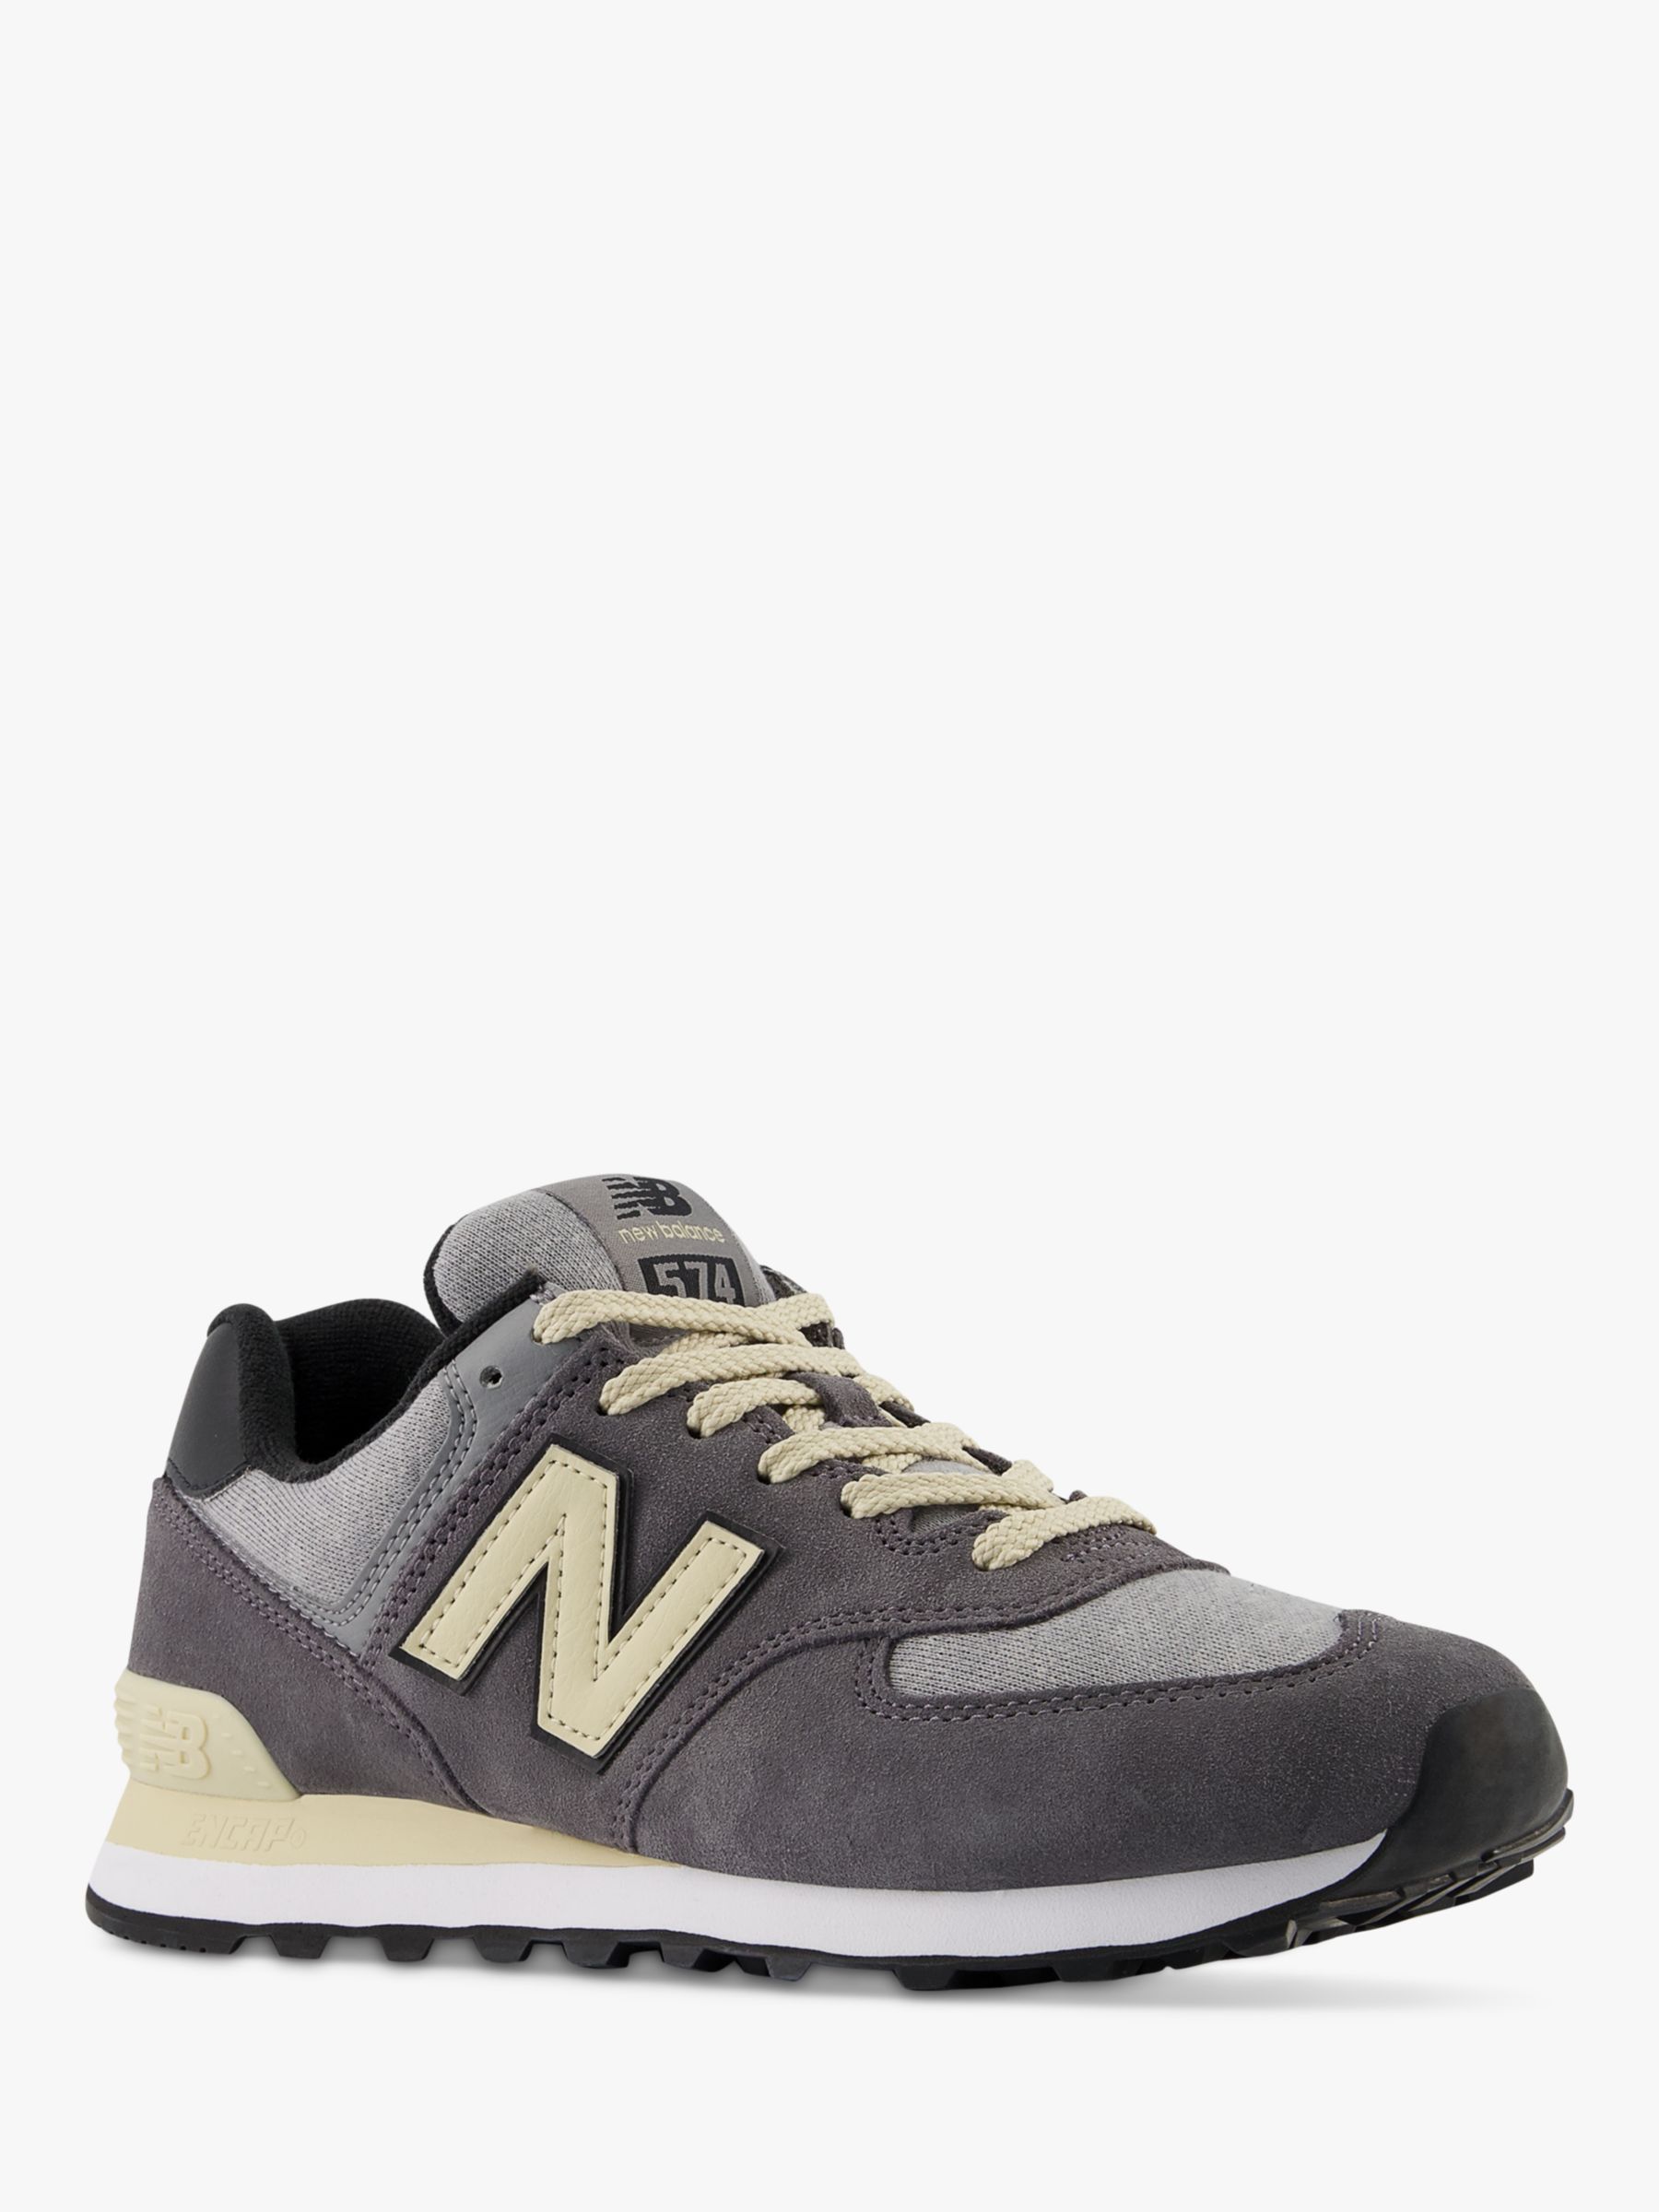 Buy New Balance 574 Women's Trainers Online at johnlewis.com